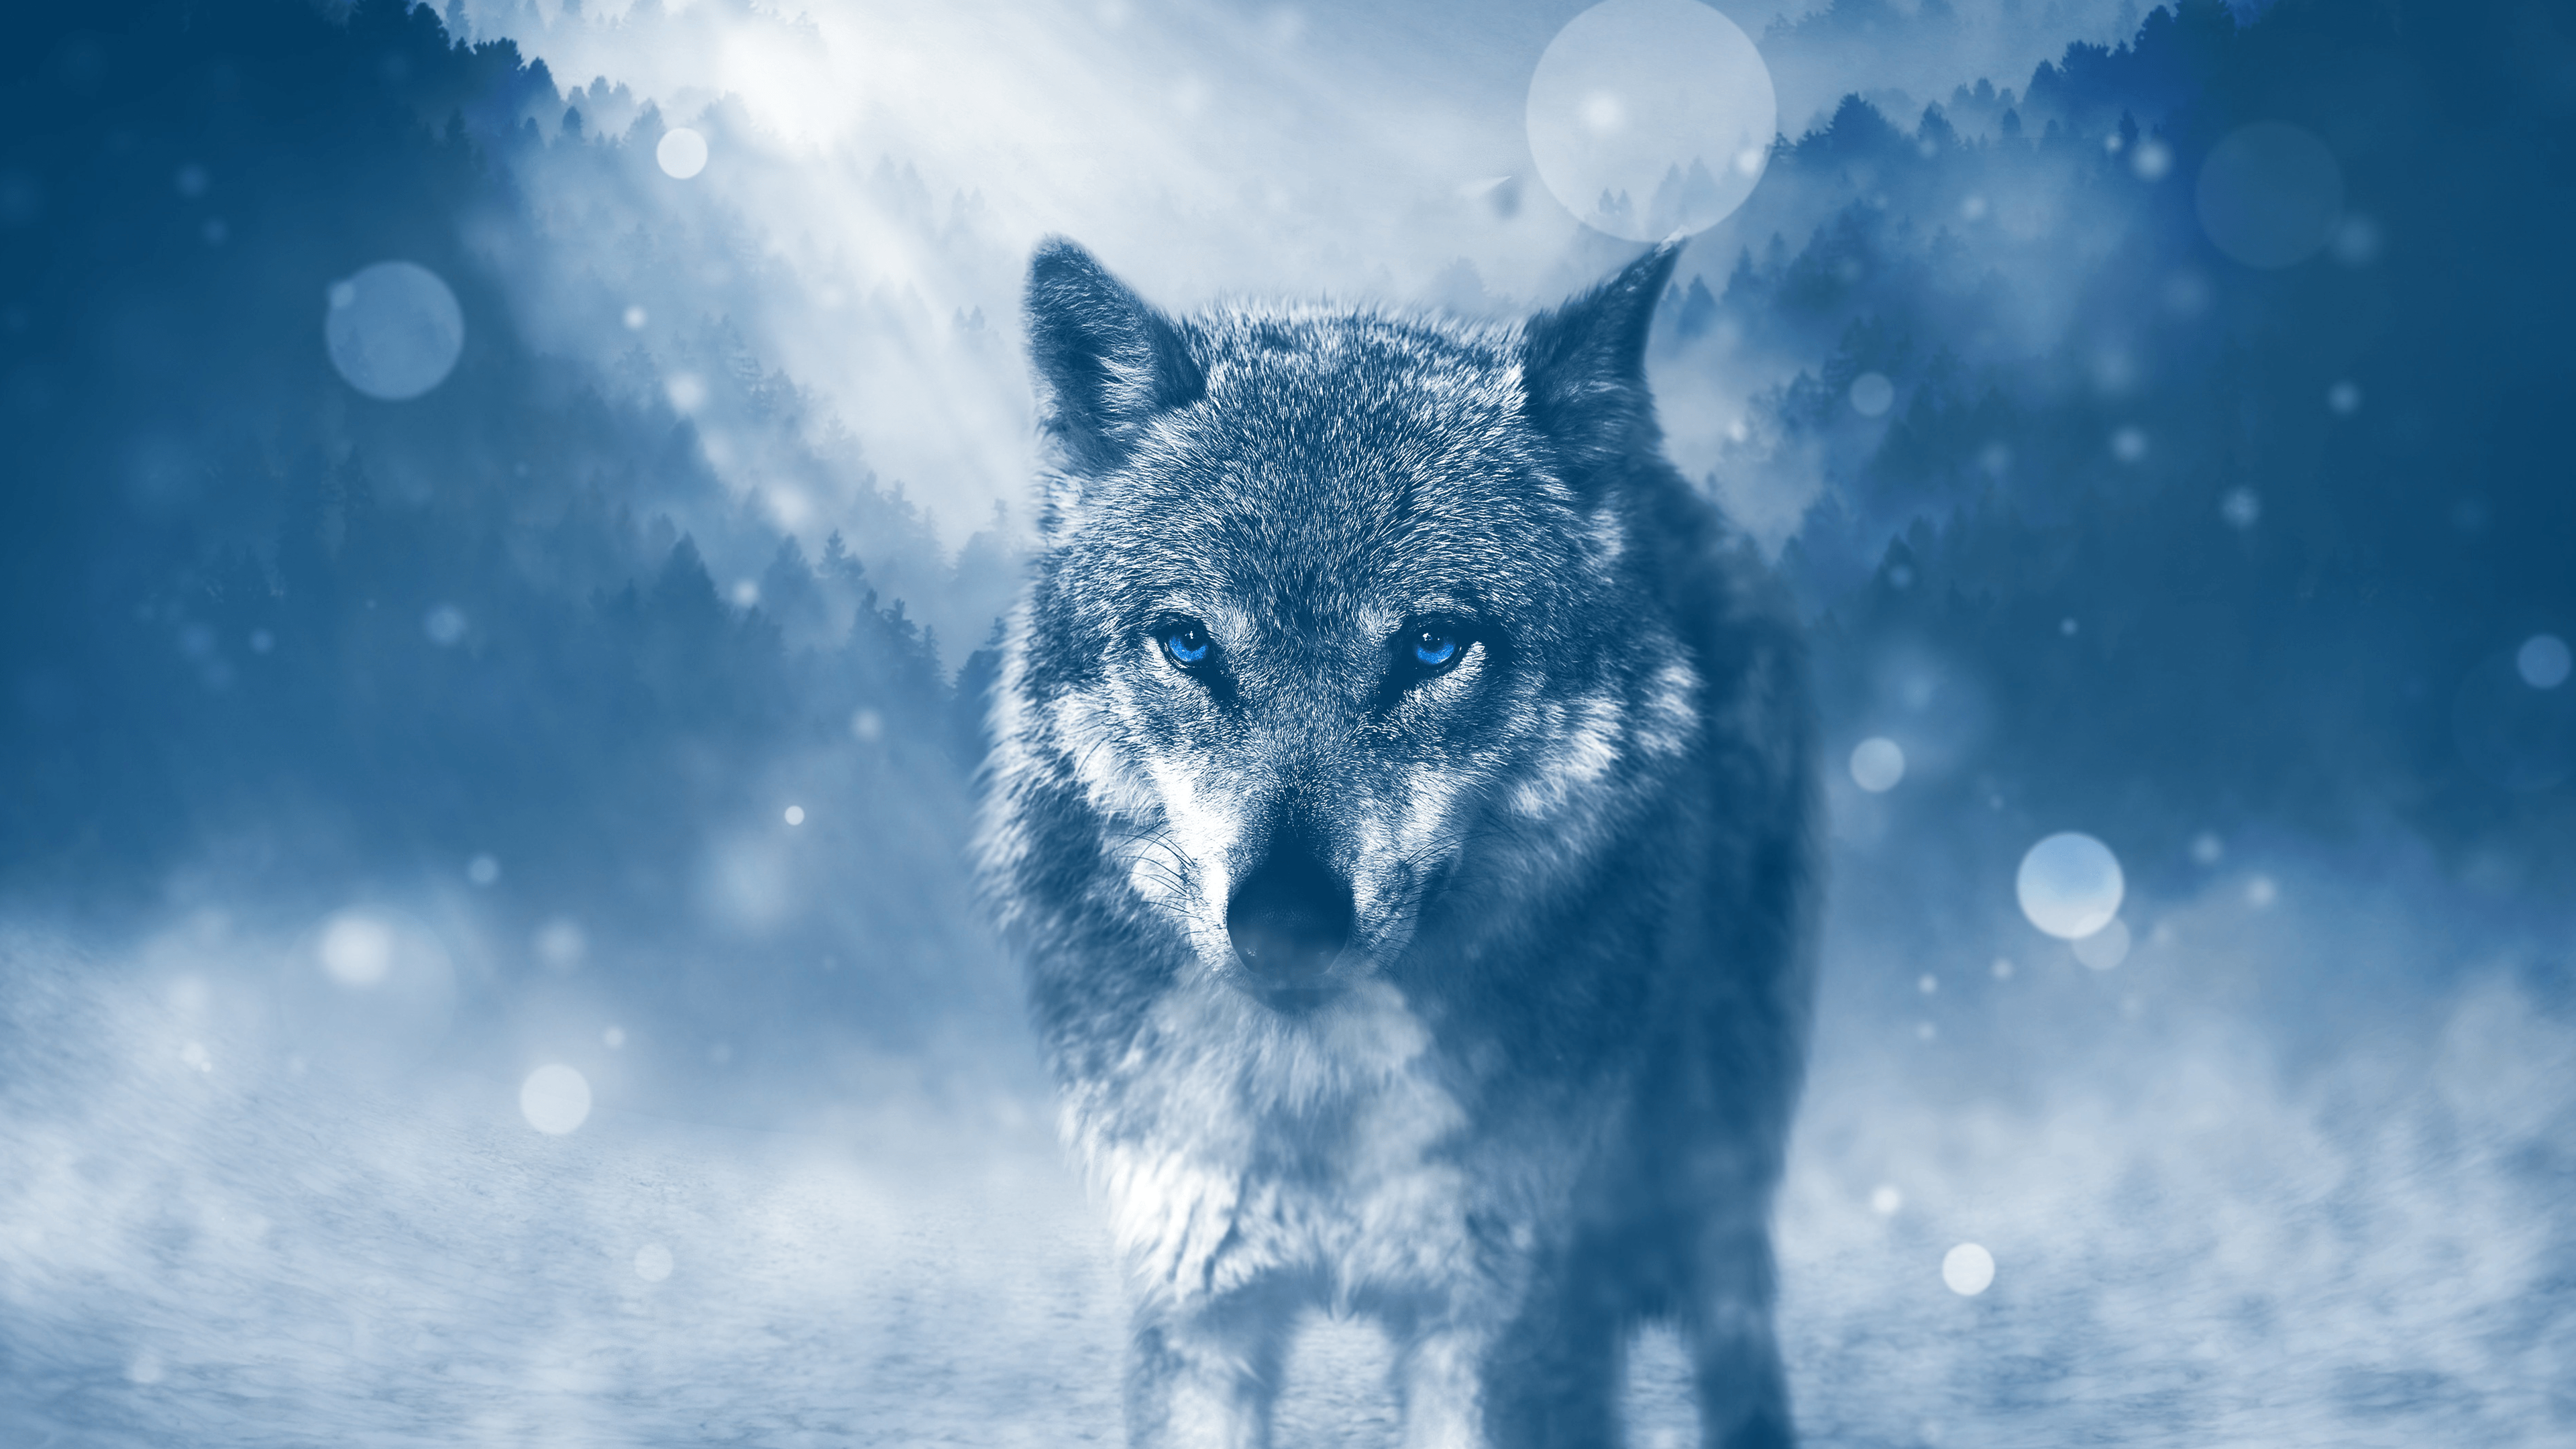 Lonewolf Game Wallpapers - Wallpaper Cave